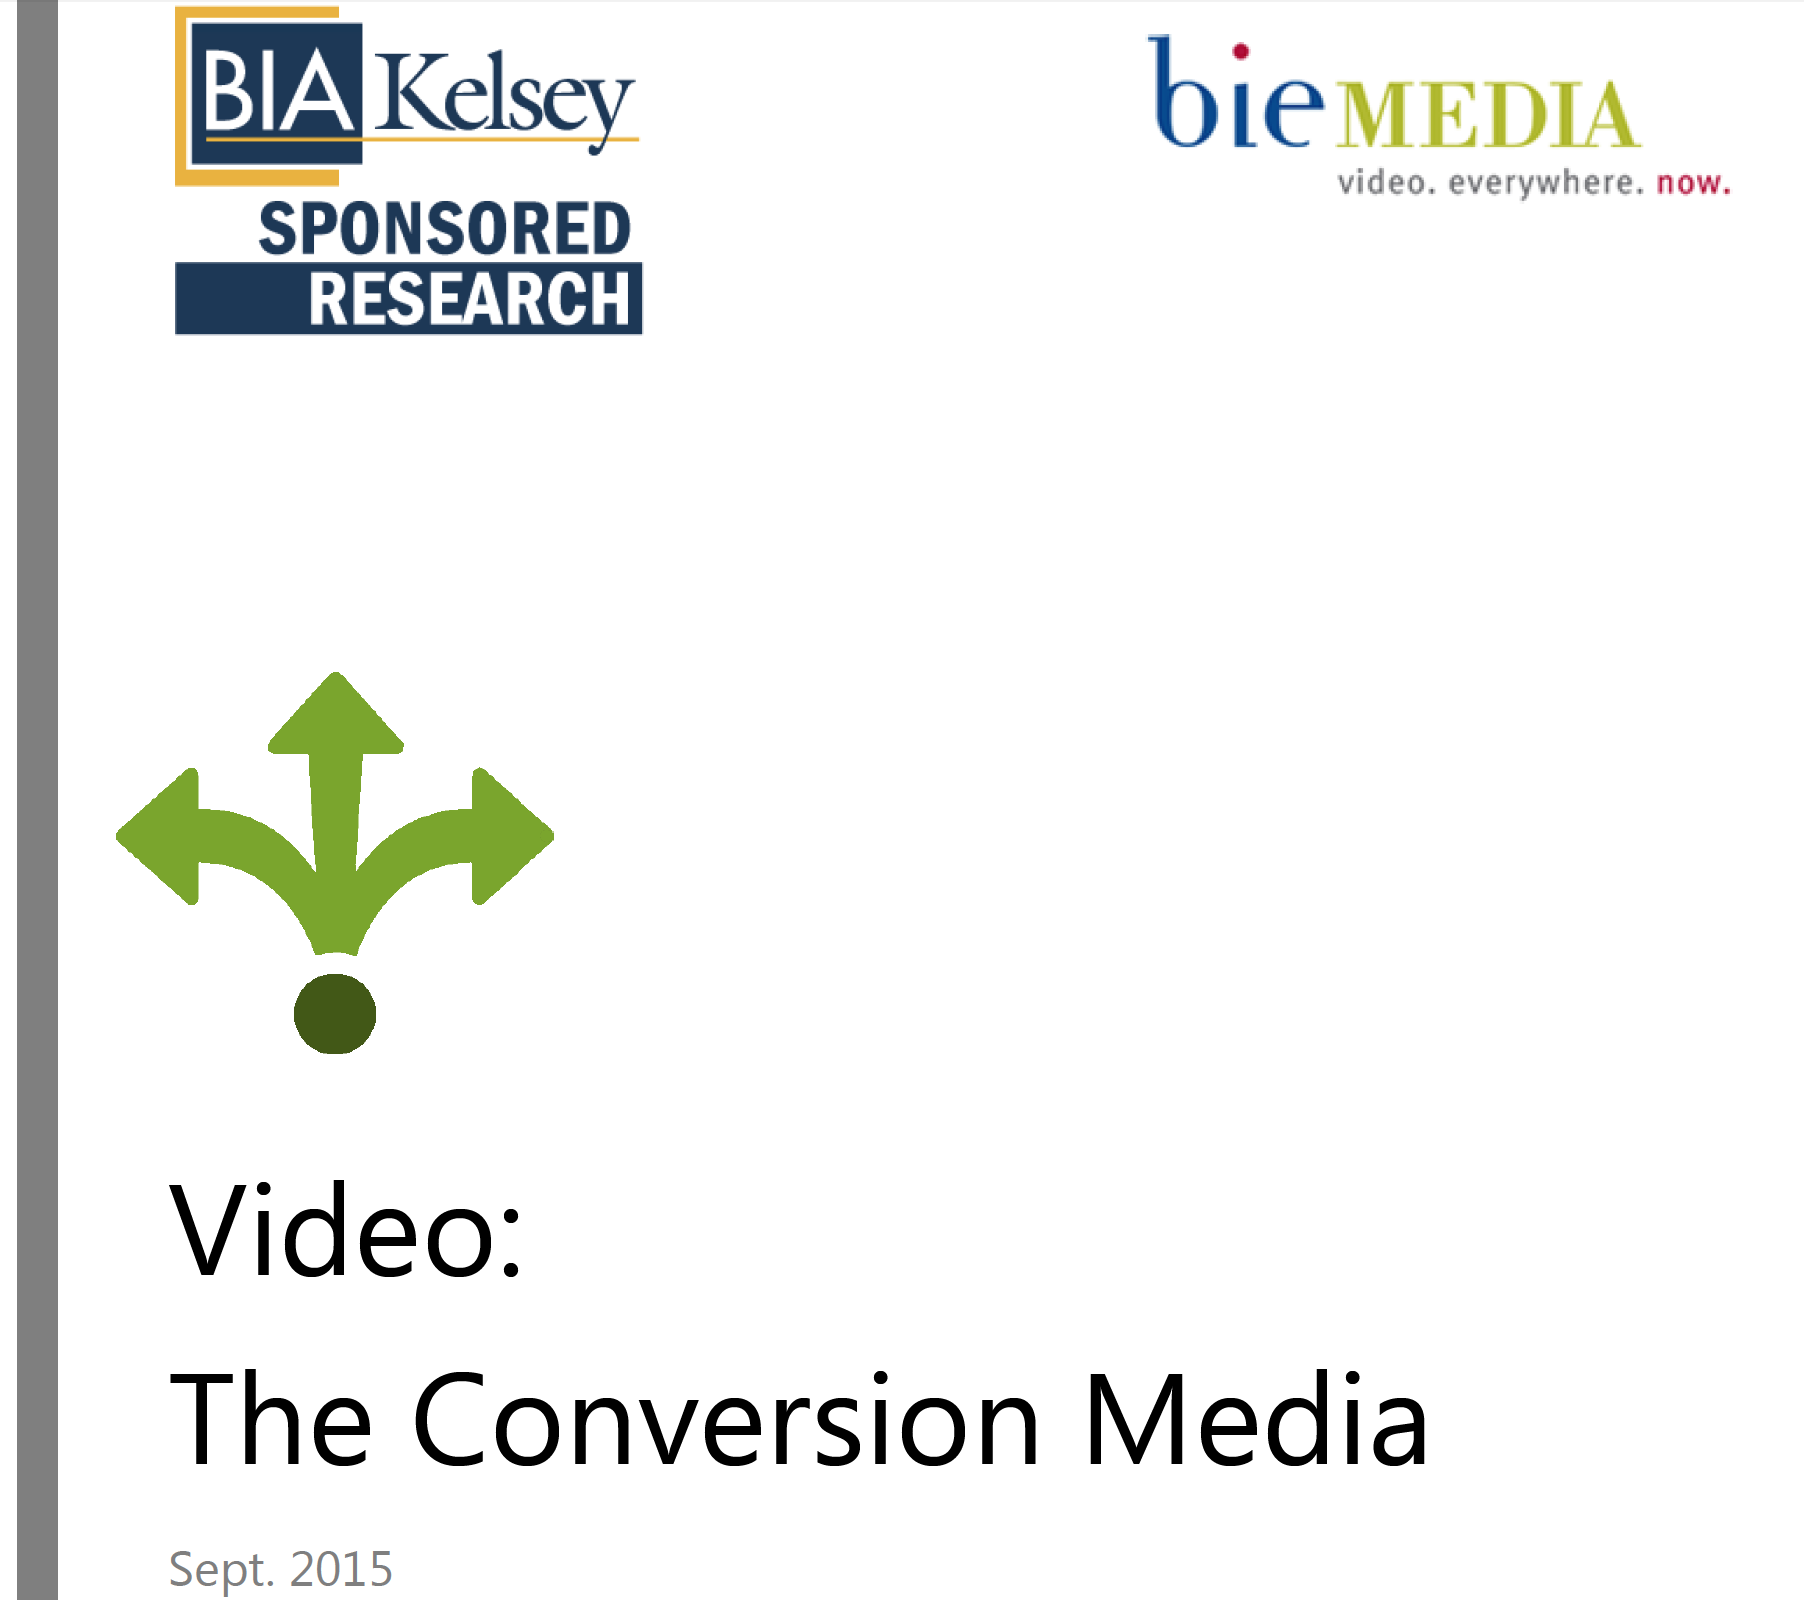 Video, The Conversion Medium: A New BIA/Kelsey Report